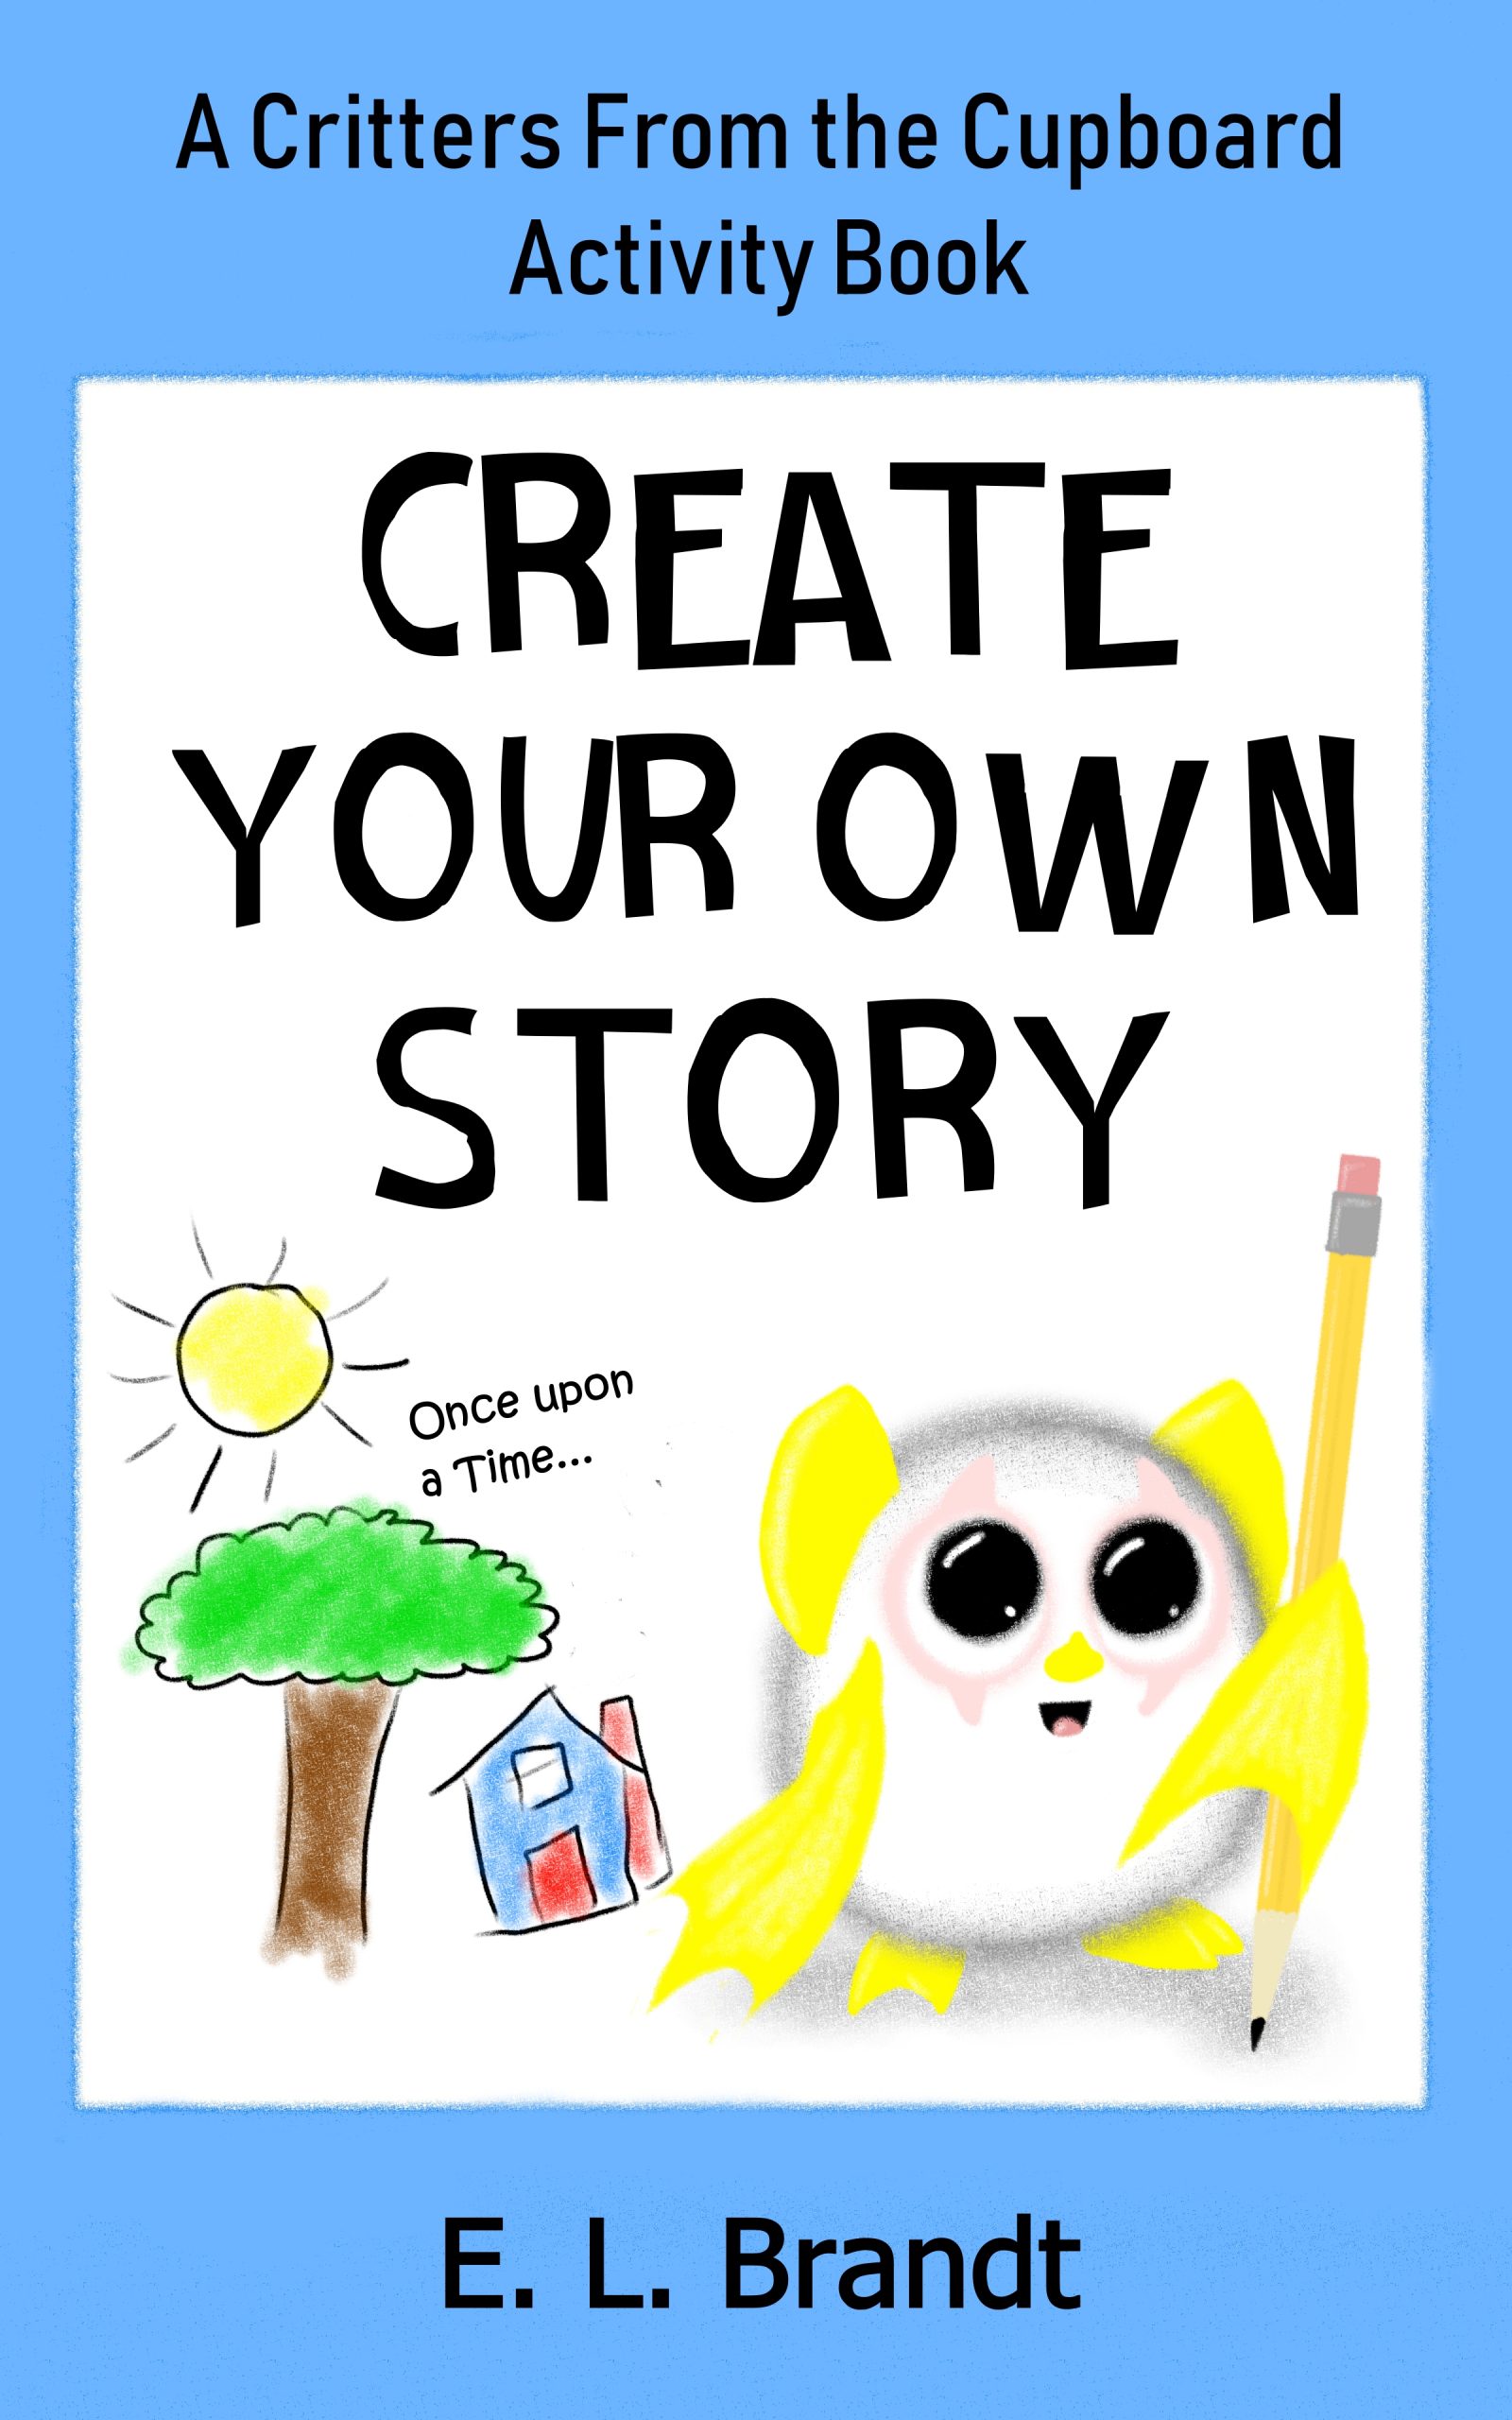 Creat your own Story - blue